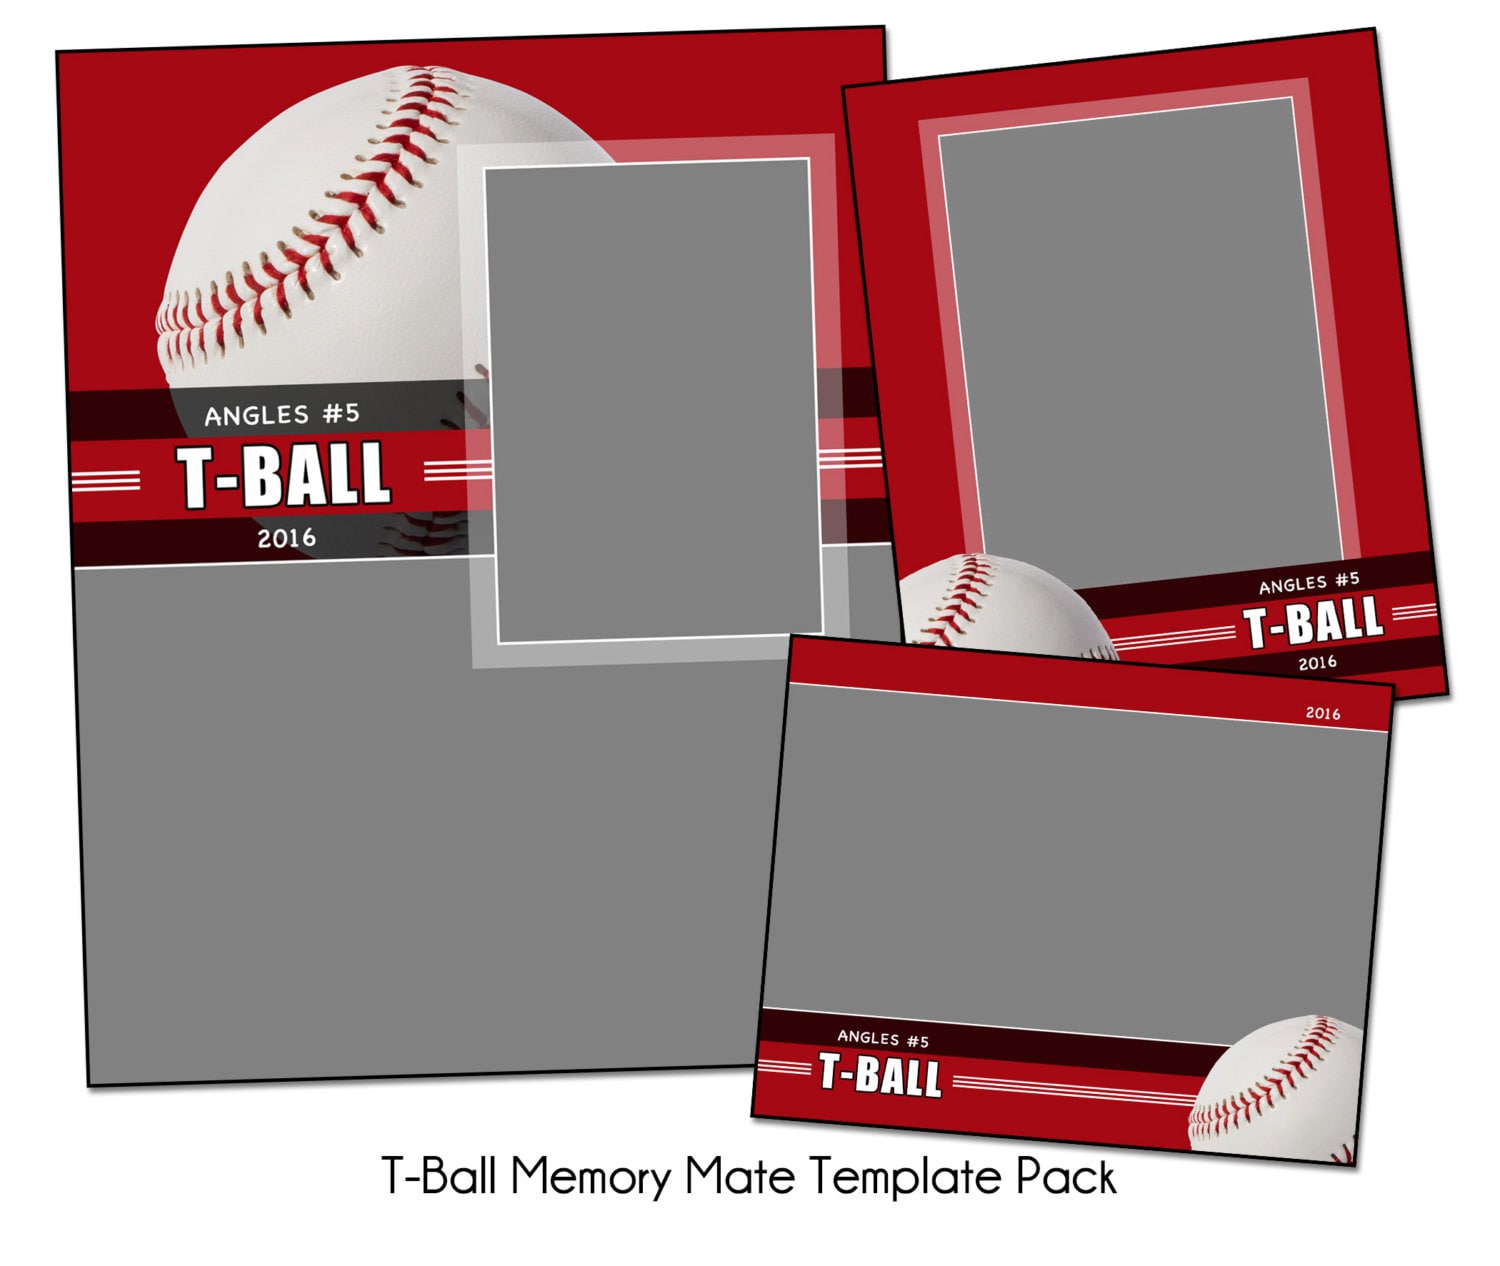 t-ball-pack-a-memory-mate-sports-photo-templates-digital